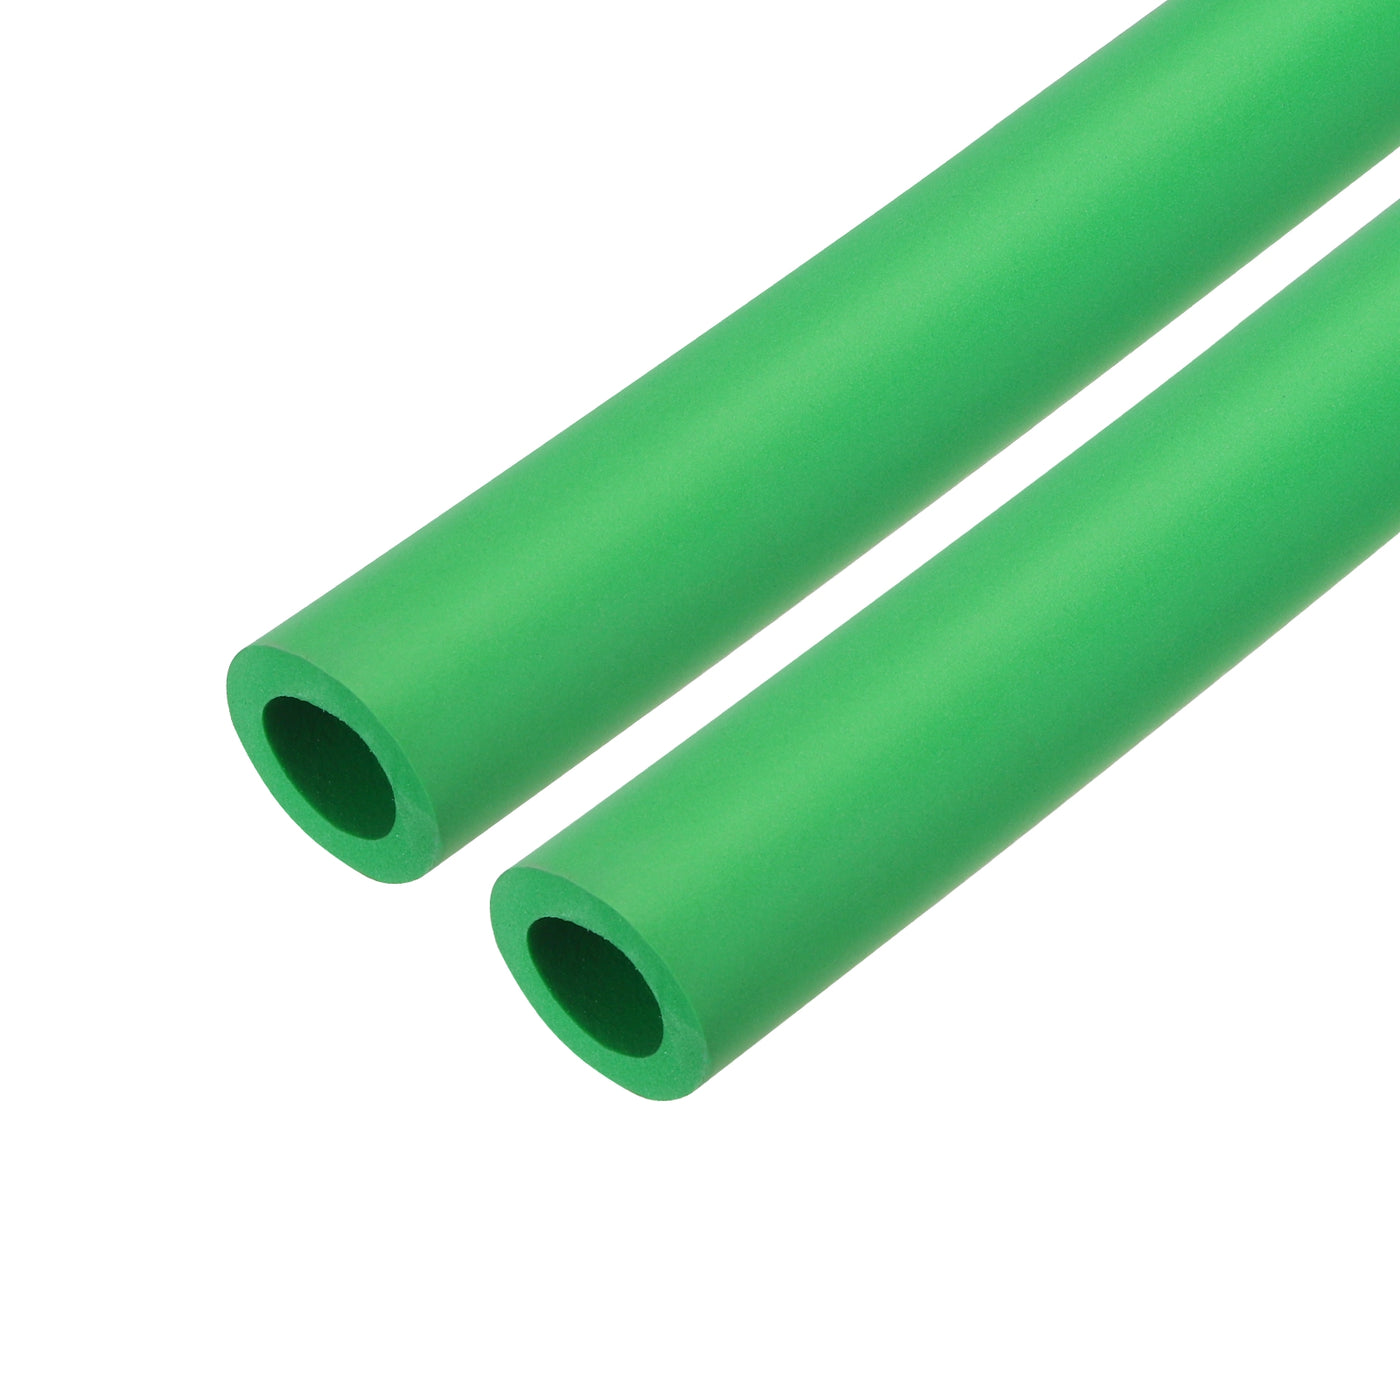 uxcell Uxcell 2pcs 3.3ft Pipe Insulation Tube 18mm ID 30mm OD Foam Tubing for Handle Grip Support, Green